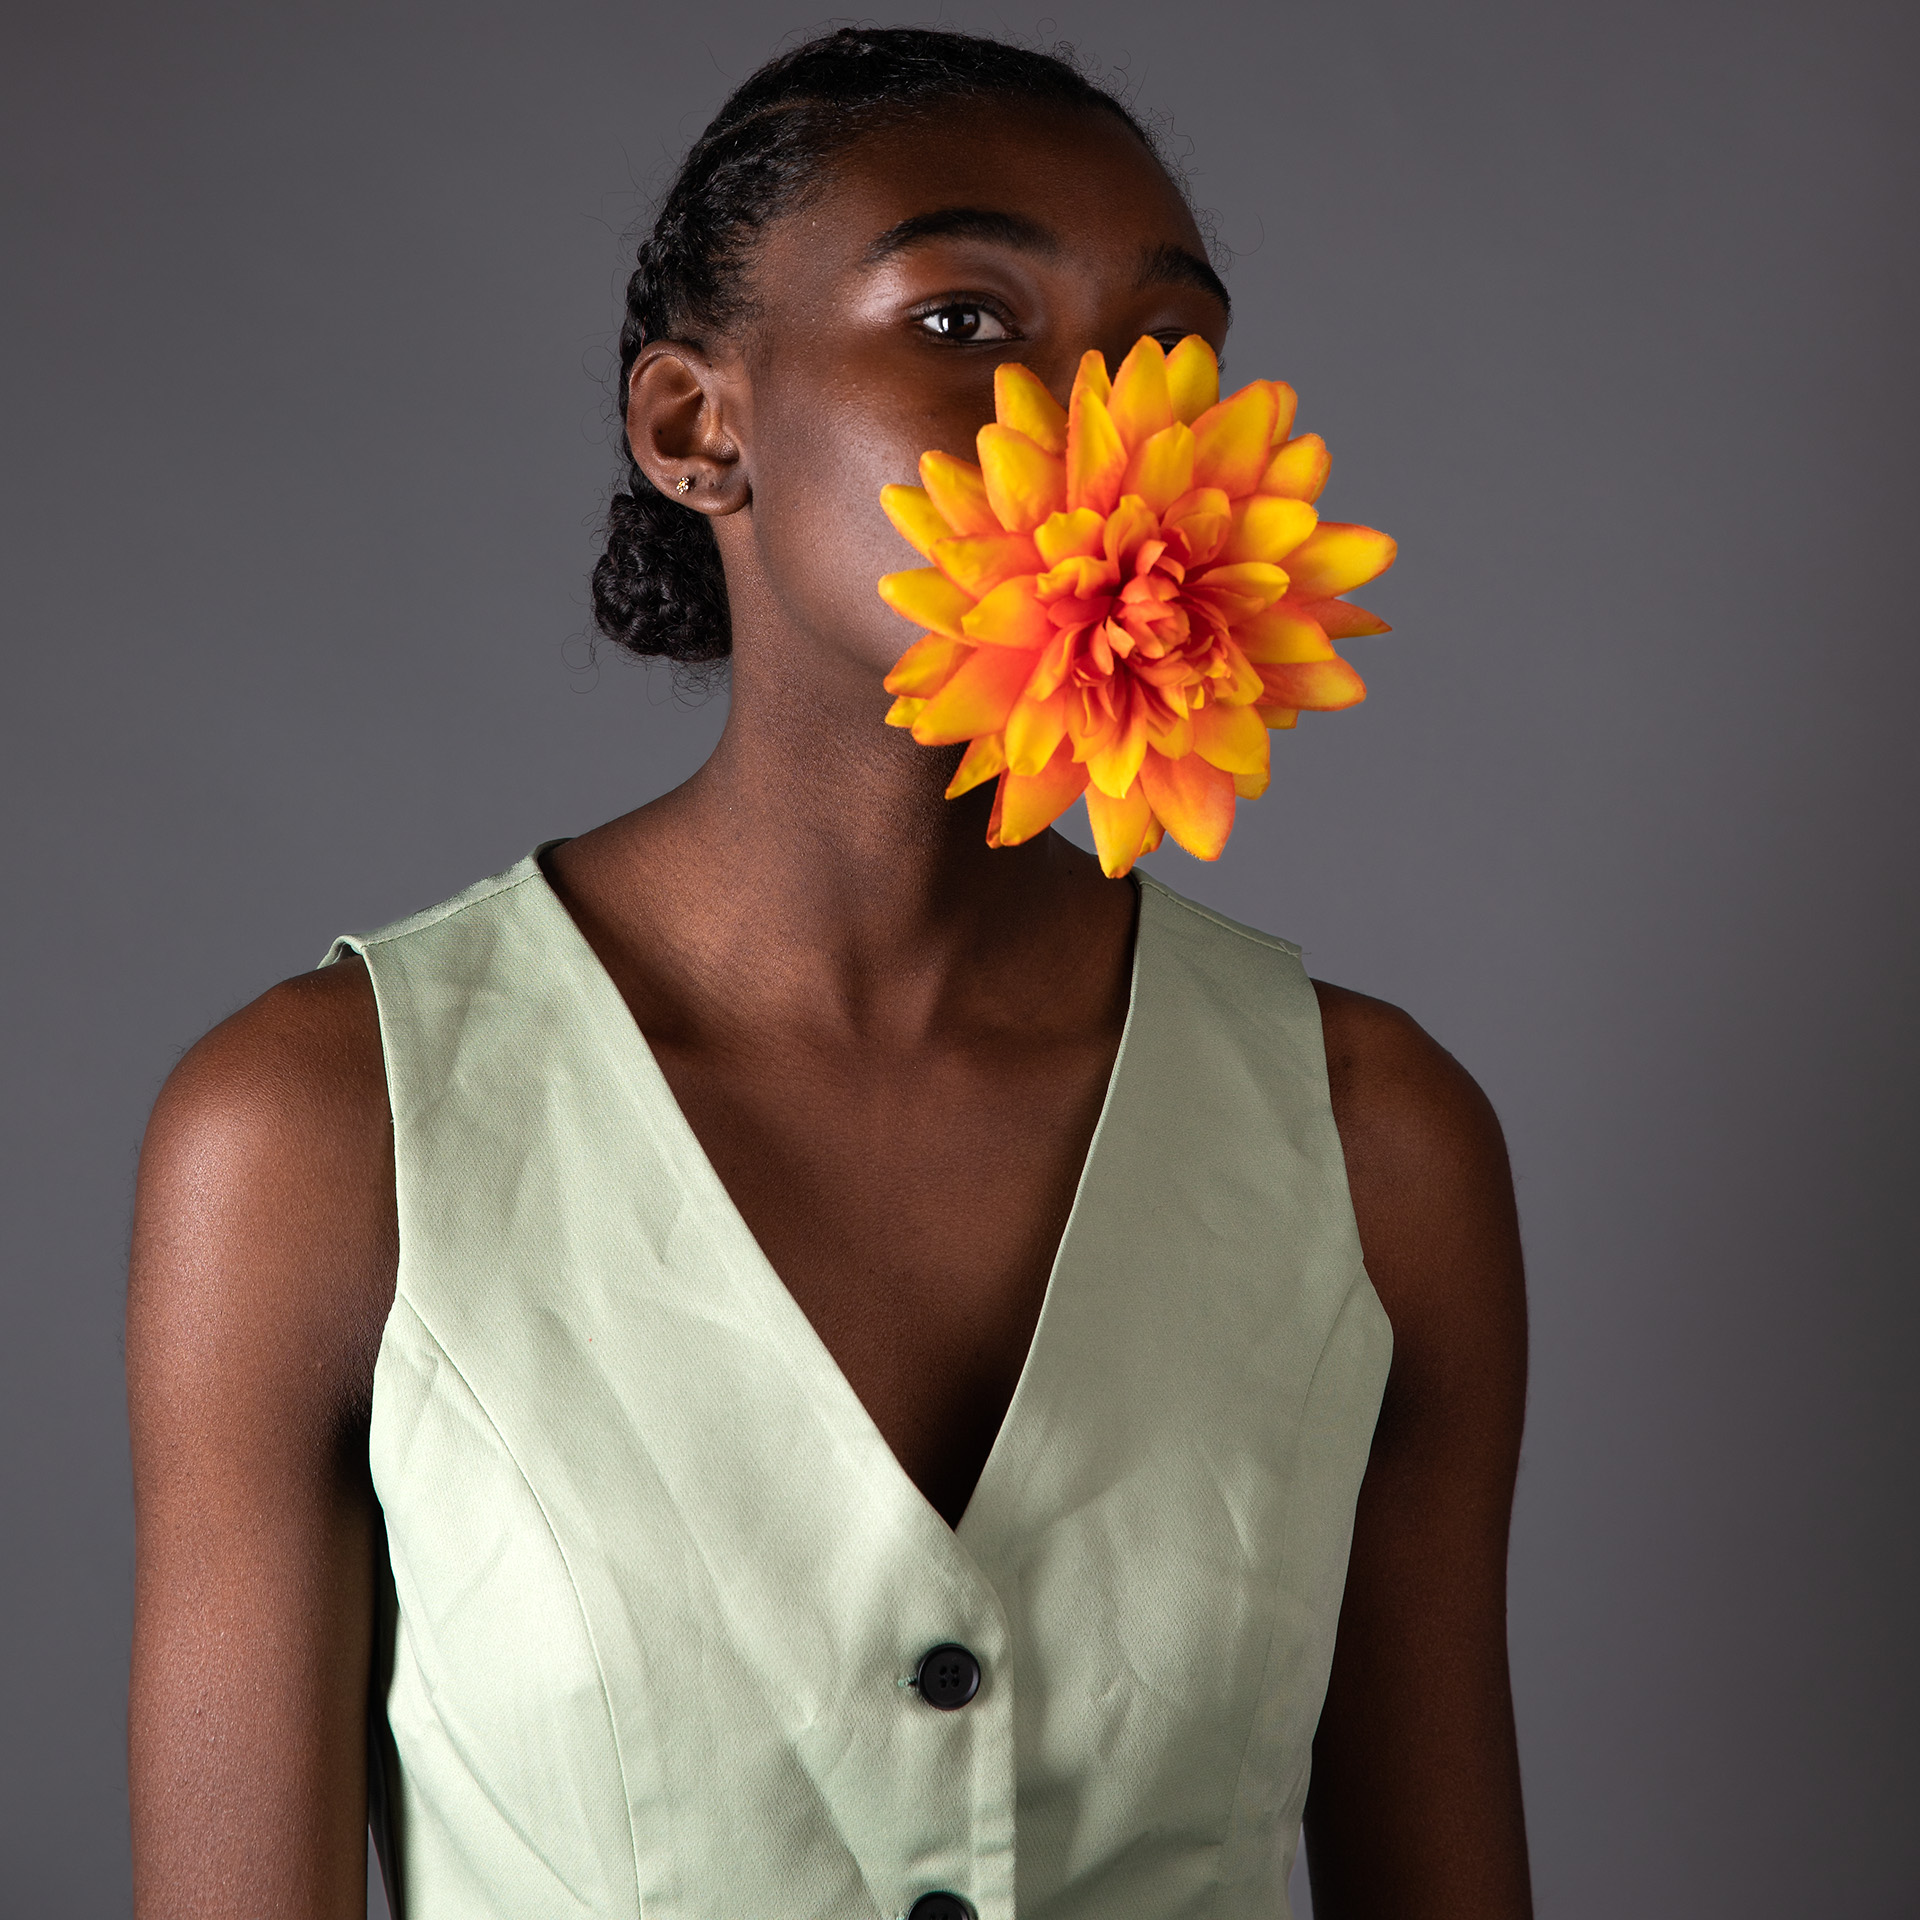 Black woman, her hair styled into short braids that are wrapped in a bun. She is wearing a light green vest 1 and a half buttons are in frame. One eye is looking directly into the camera, the other eye is blocked by a petal of an orange flower in her mouth.